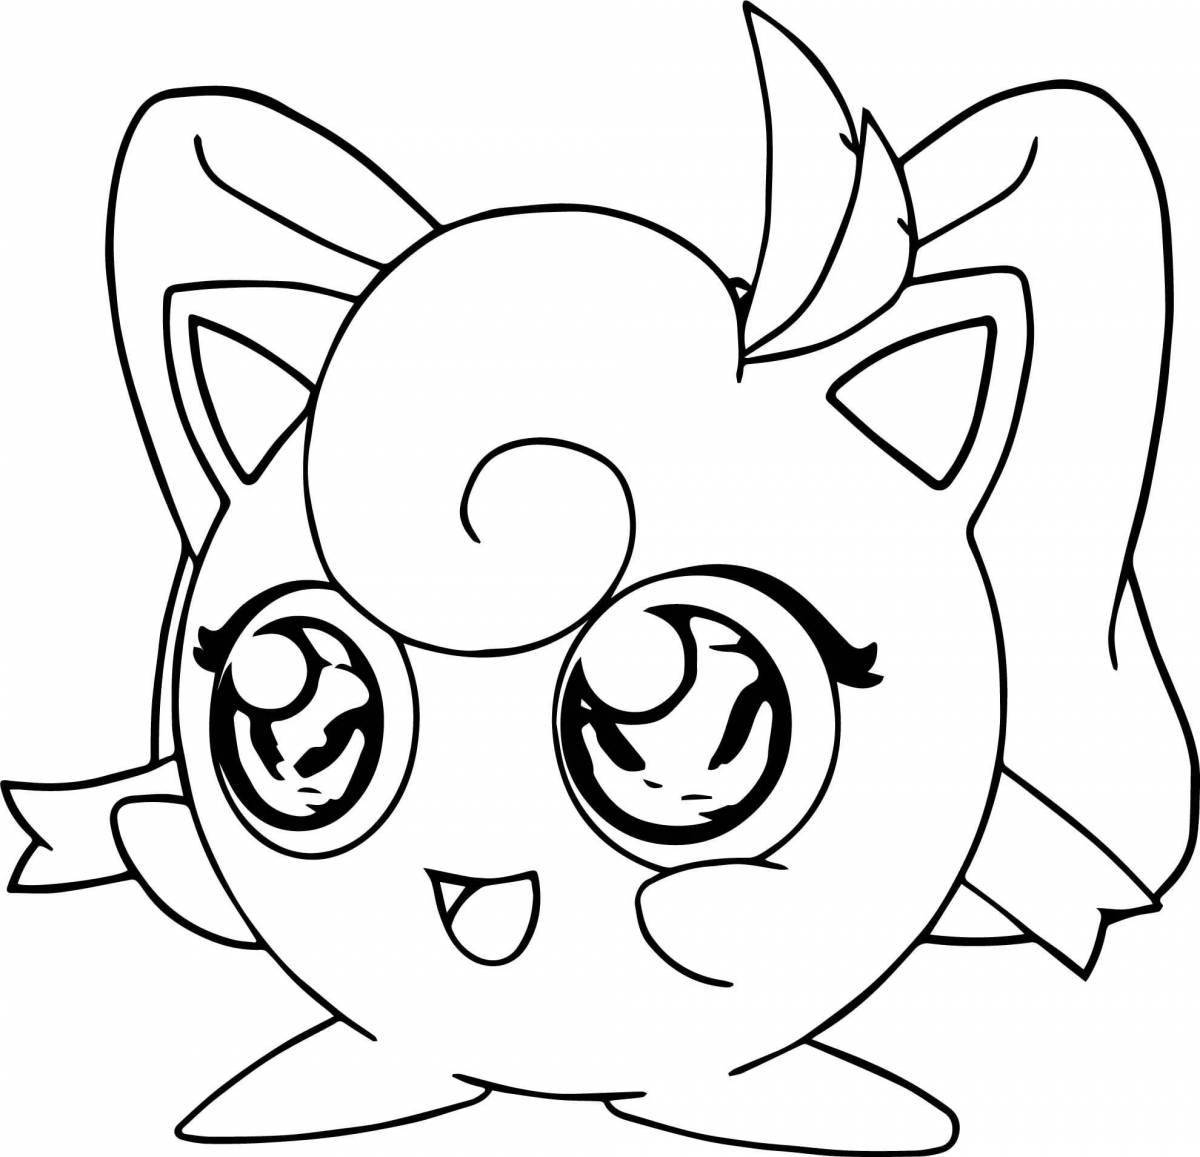 Adorable squick coloring page